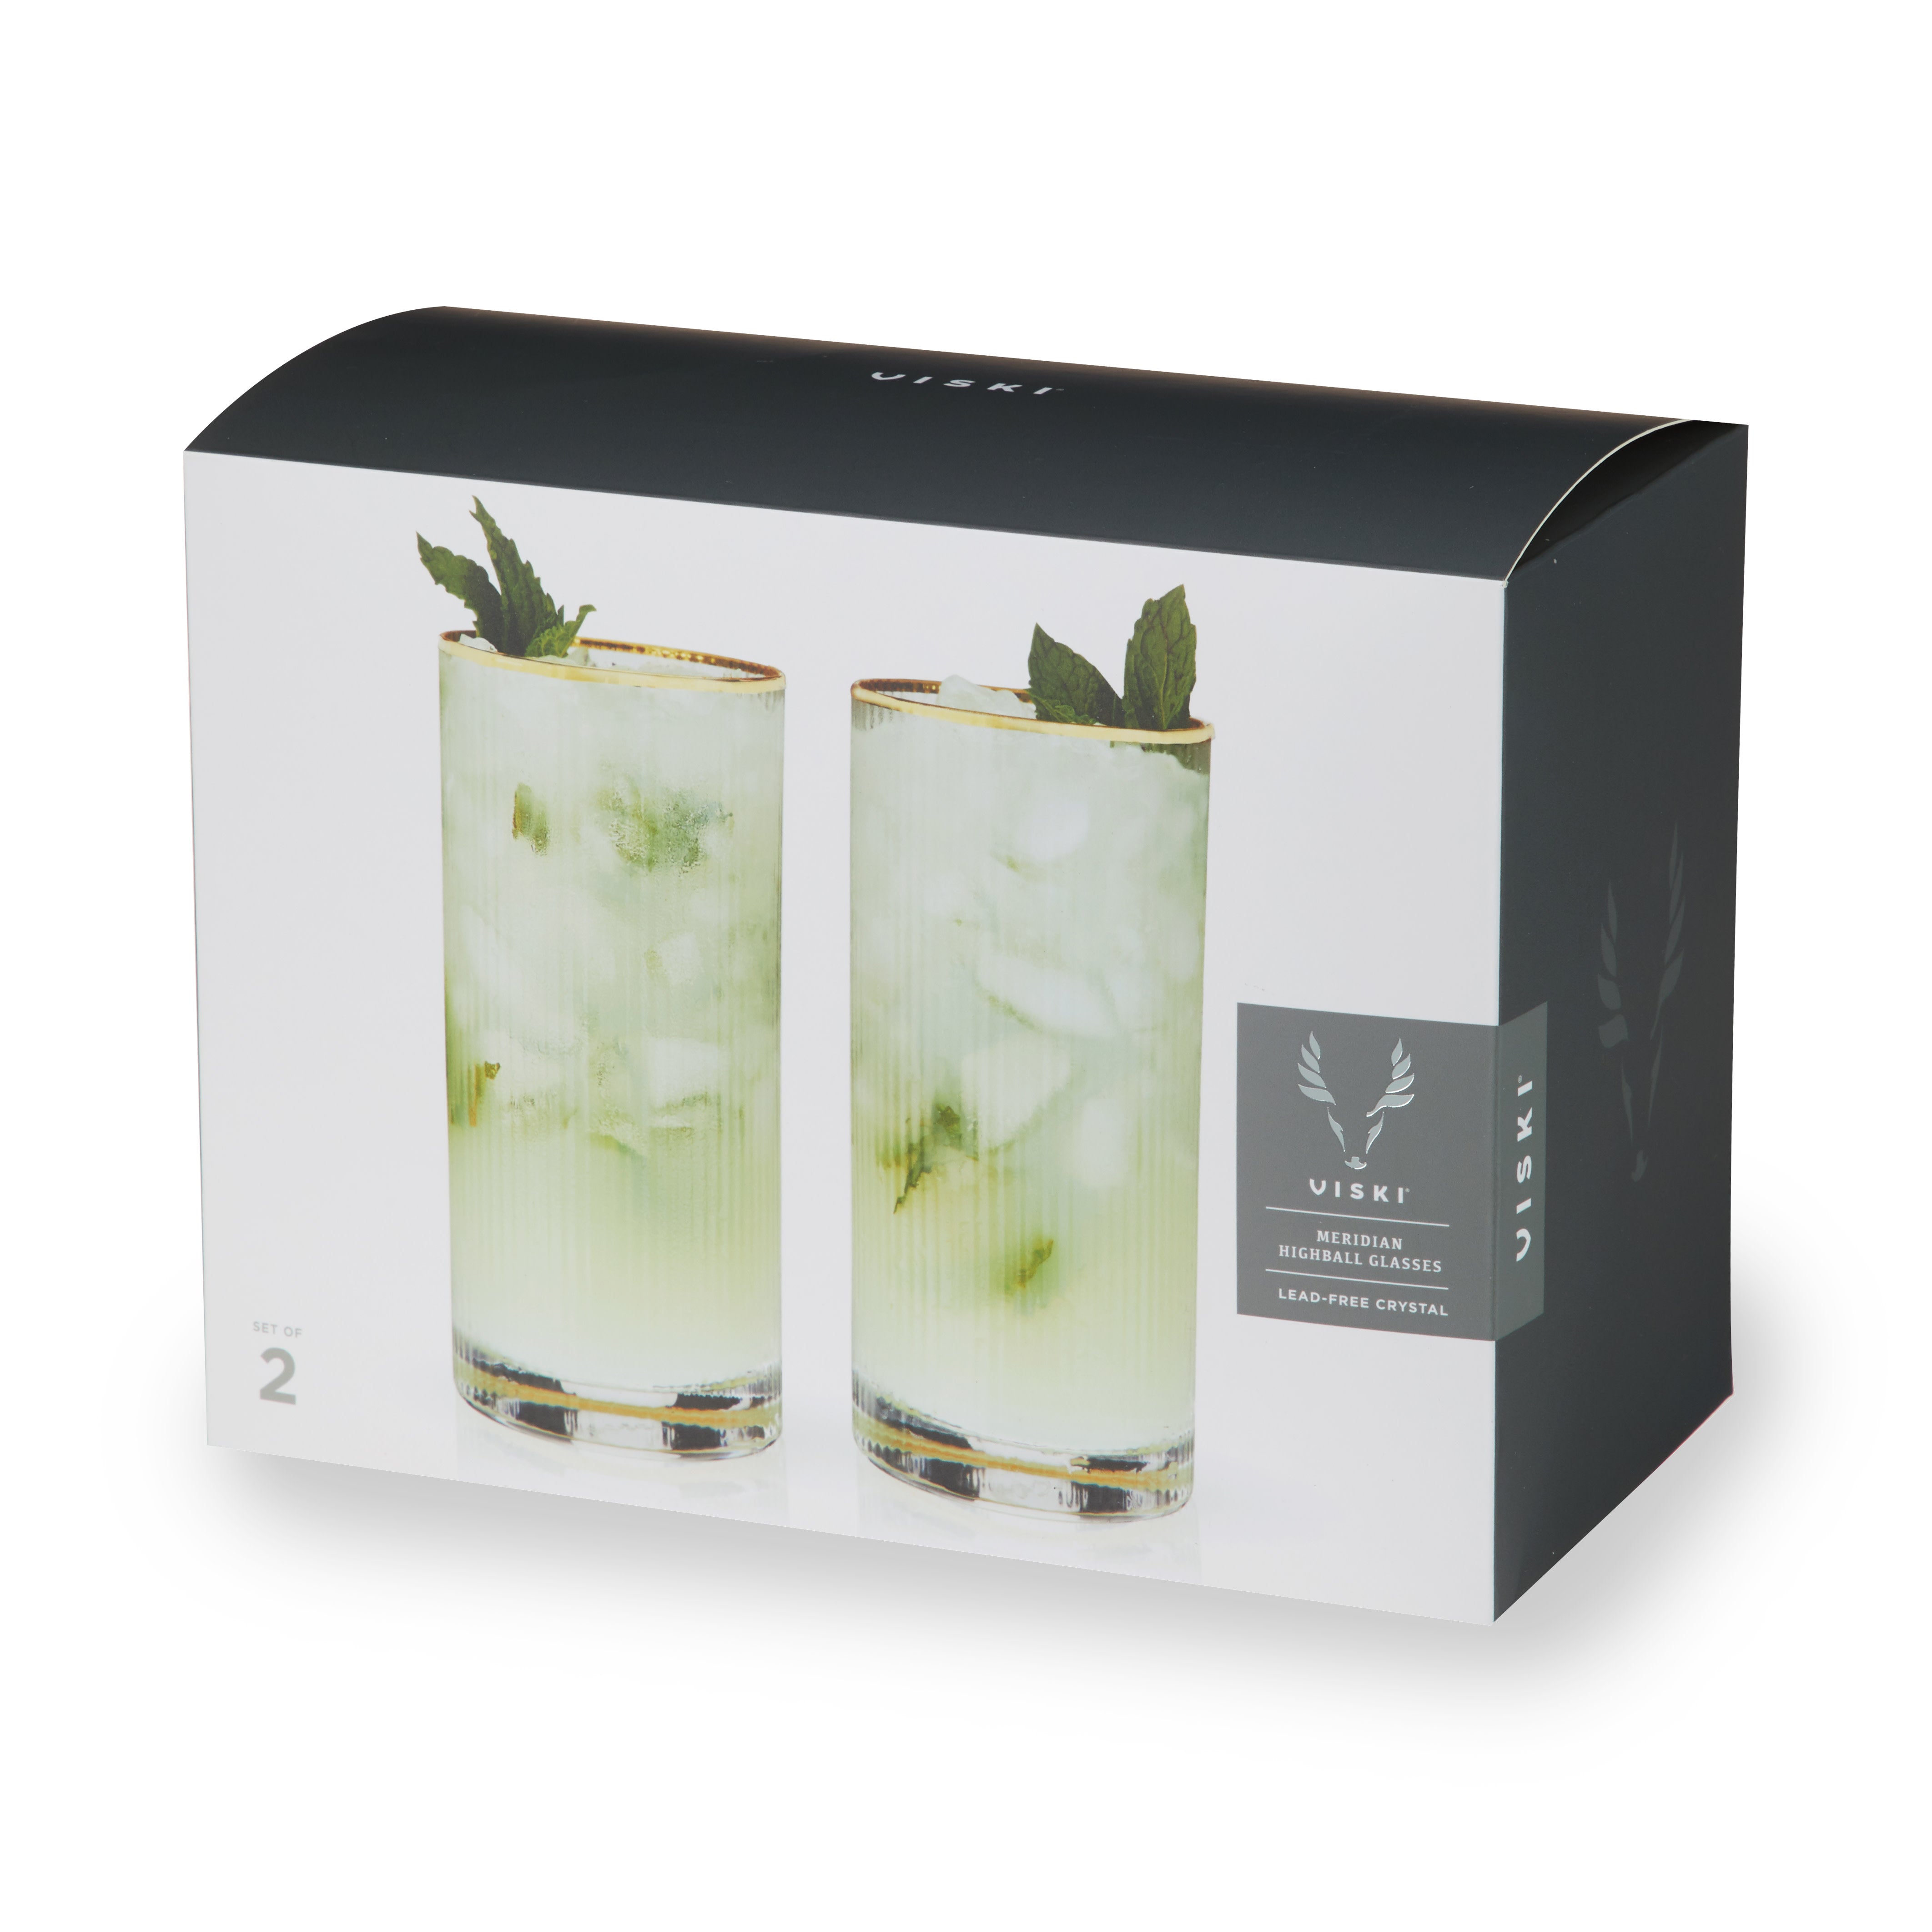 Angle Bell Clear Highball Glasses Set of 2